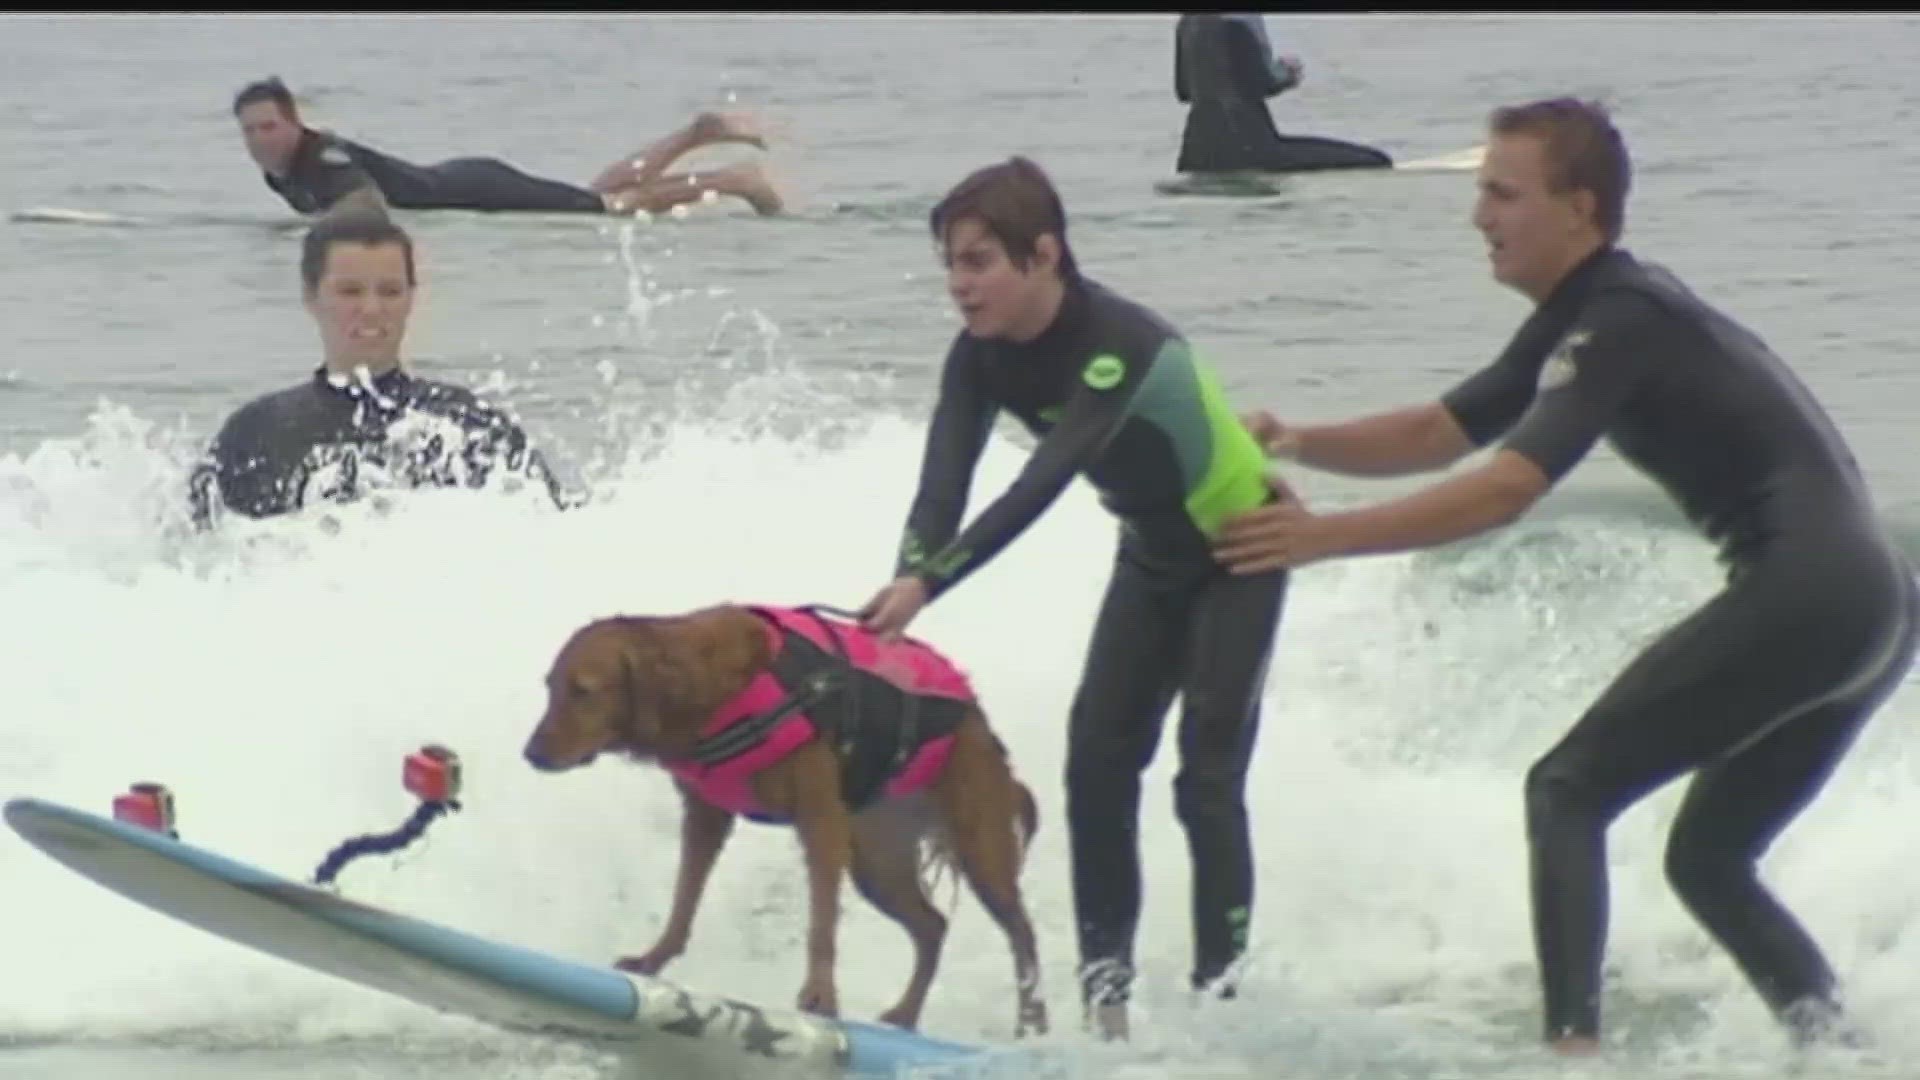 The 15-year-old canine helped countless veterans and kids during more than a decade providing therapy in the waves off San Diego.